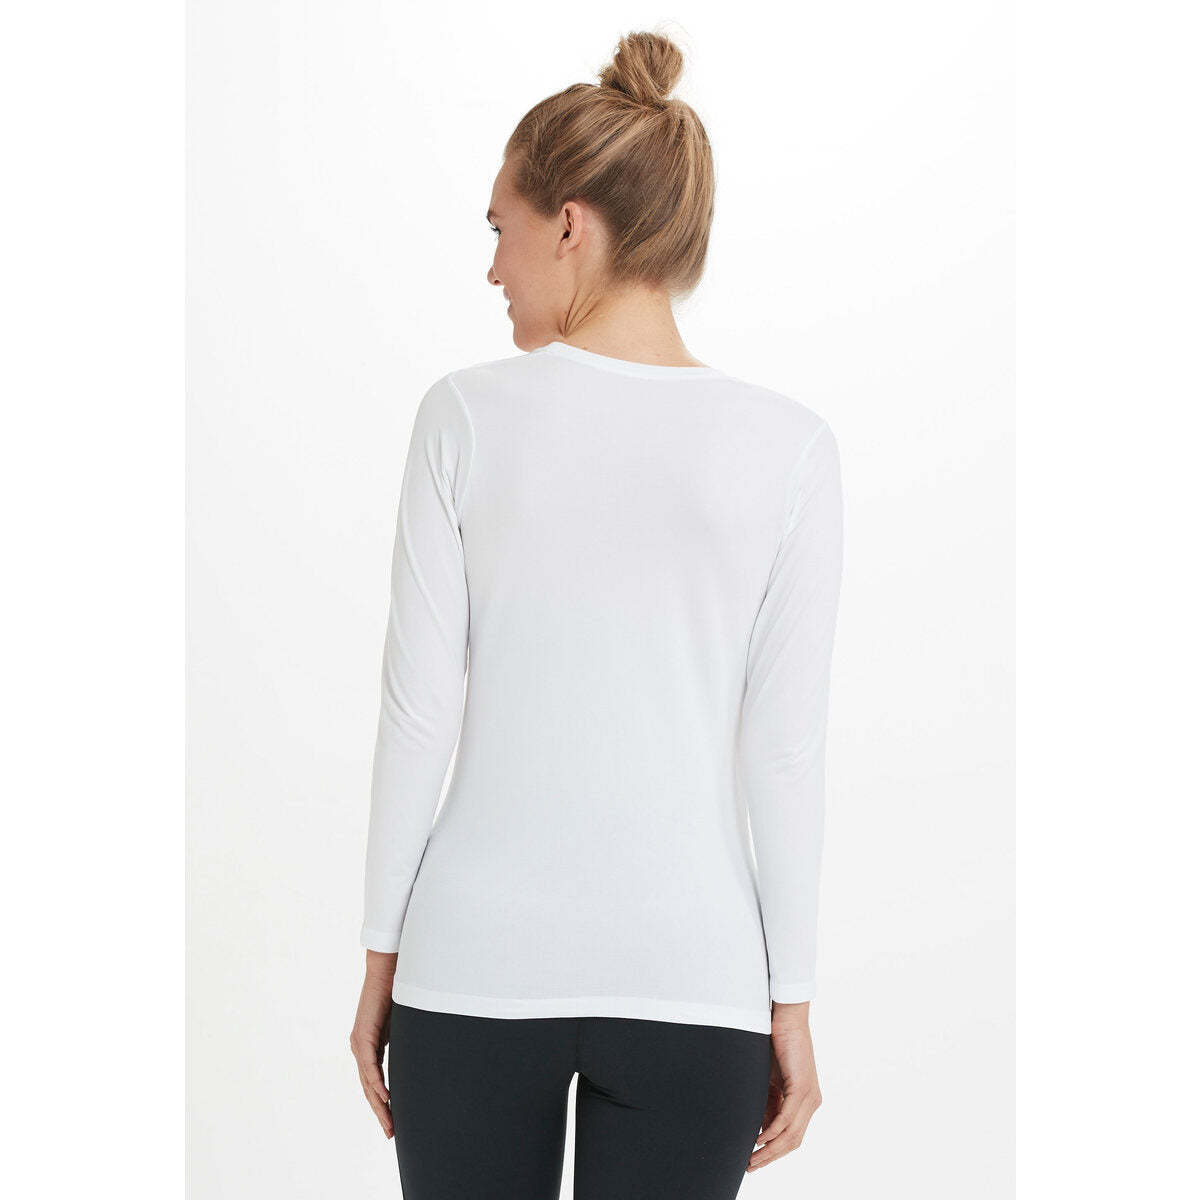 Athlecia Julee Womenswear Loose Fit Long Sleeve Seamless Tee - White 2 Shaws Department Stores